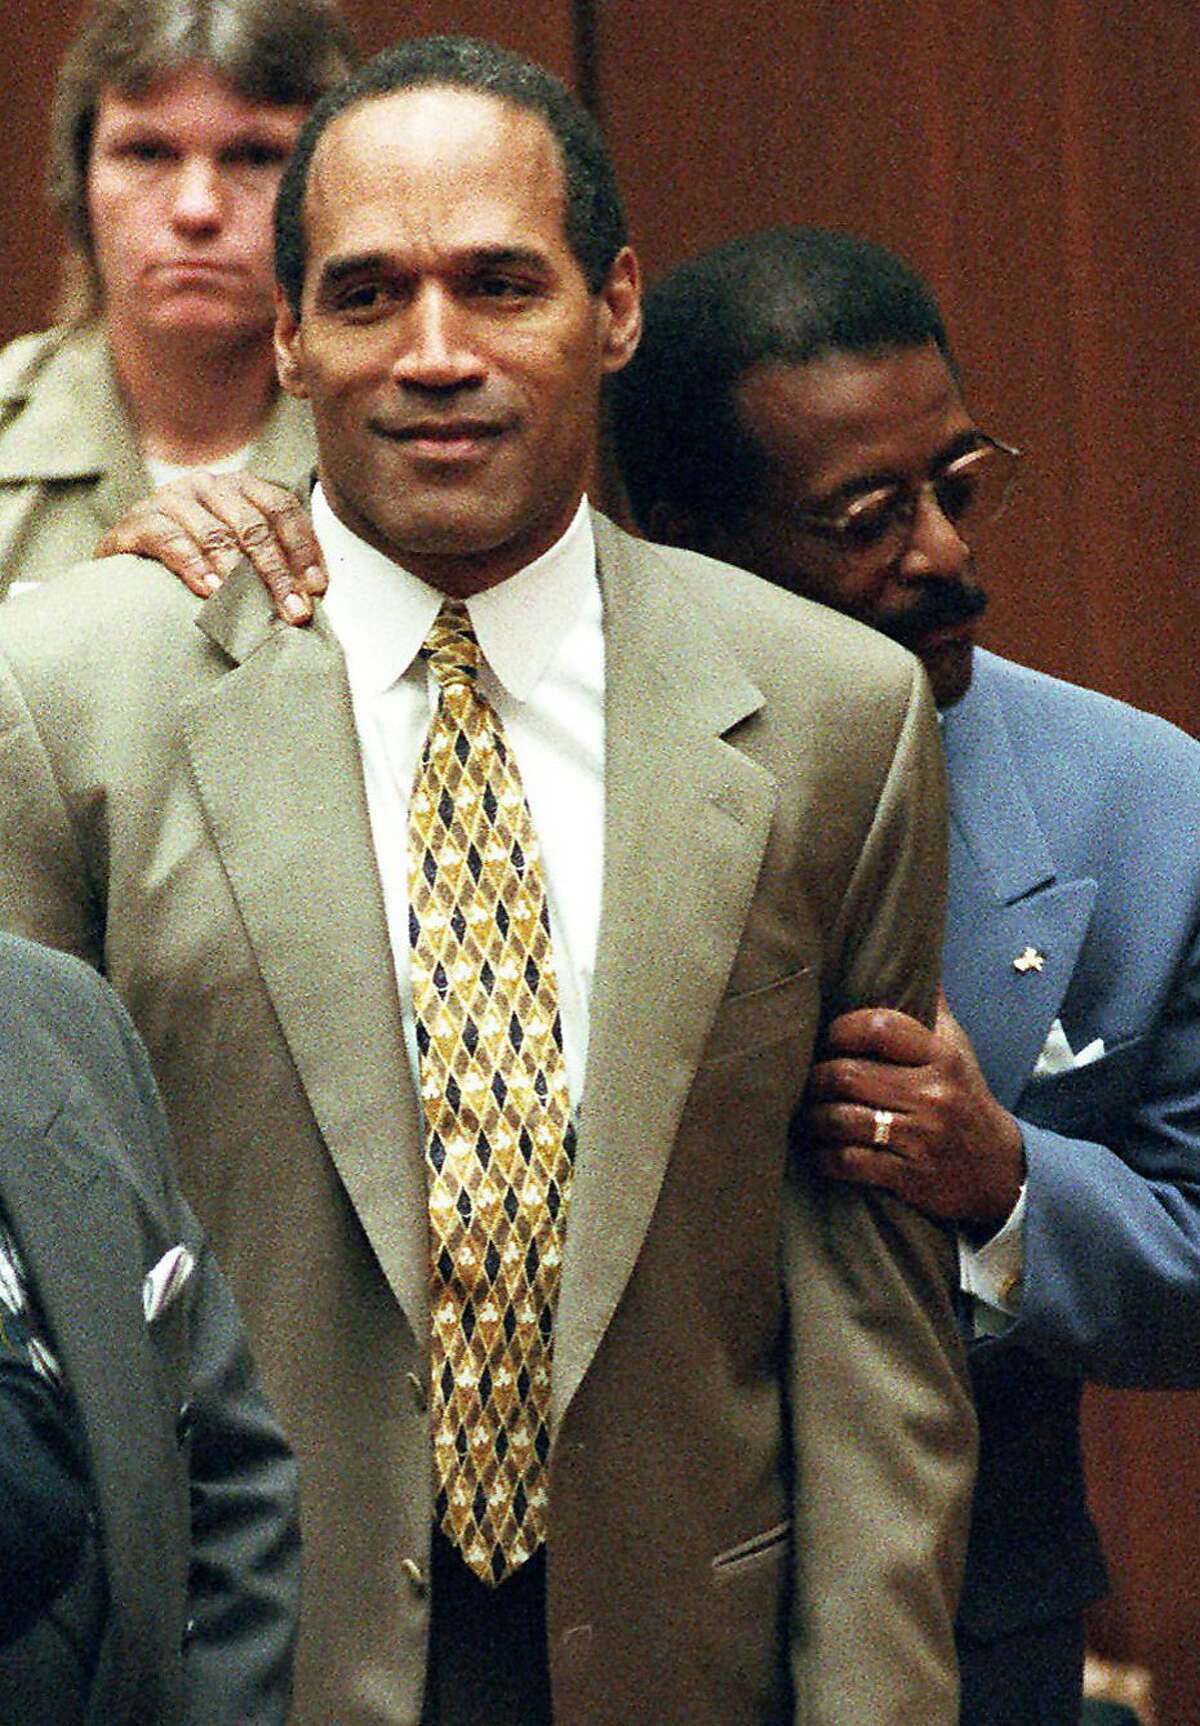 FILE - In this Oct. 3, 1995 file photo, attorney Johnnie Cochran Jr. holds onto O.J. Simpson as the not guilty verdict is read in a Los Angeles courtroom. Simpson's former manager has been ordered by a Los Angeles County judge Monday, June 15, 2009, to keep the former football star's so-called acquittal suit in storage until it is determined who rightfully owns it. (AP Photo/Pool, Myung J. Chun)